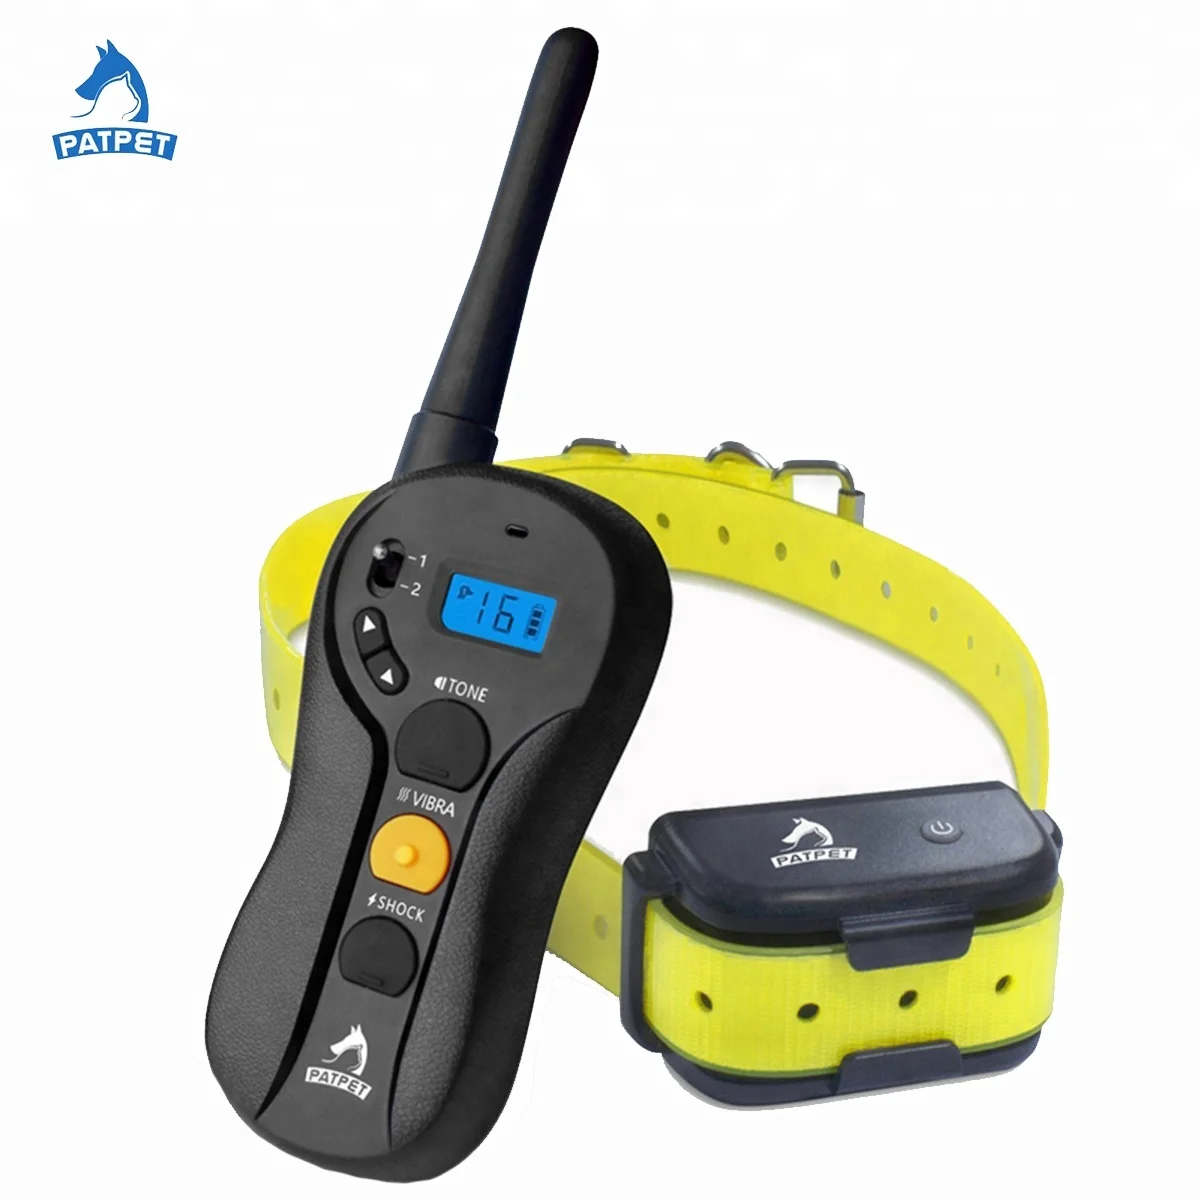 

2021 Amazon Top Selling Humane Electric Shock Training Collar Barking Remote Control Anti Bark Trainer Waterproof Rechargeable, Black/customized color